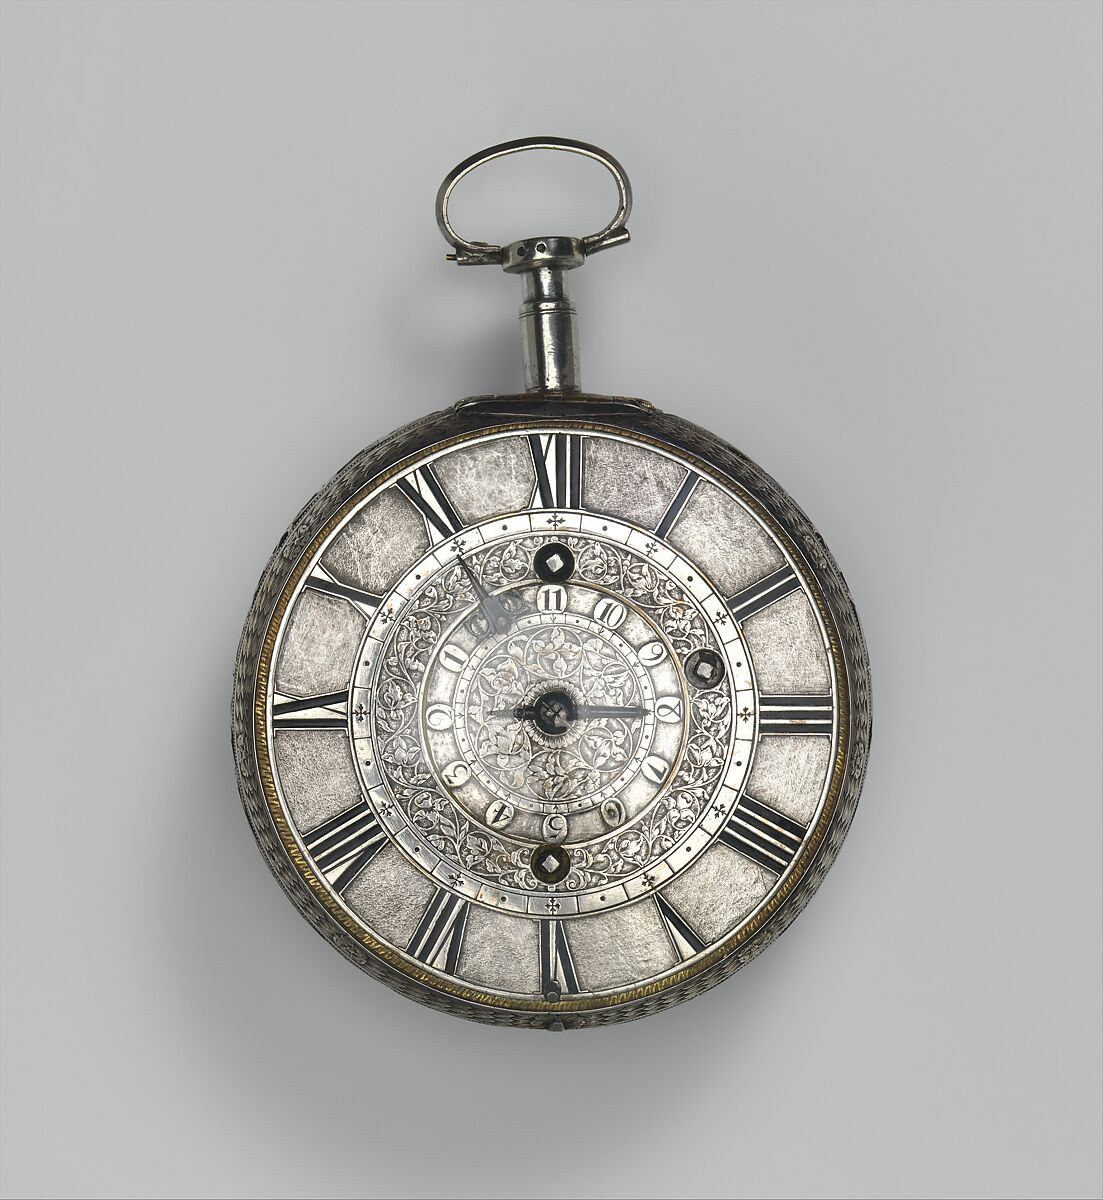 Traveling clock watch with alarm, Watchmaker: Thomas Tompion (British, 1639–1713), Case and dial: silver; Movement: gilded brass, partly blued steel, silver, British, London 